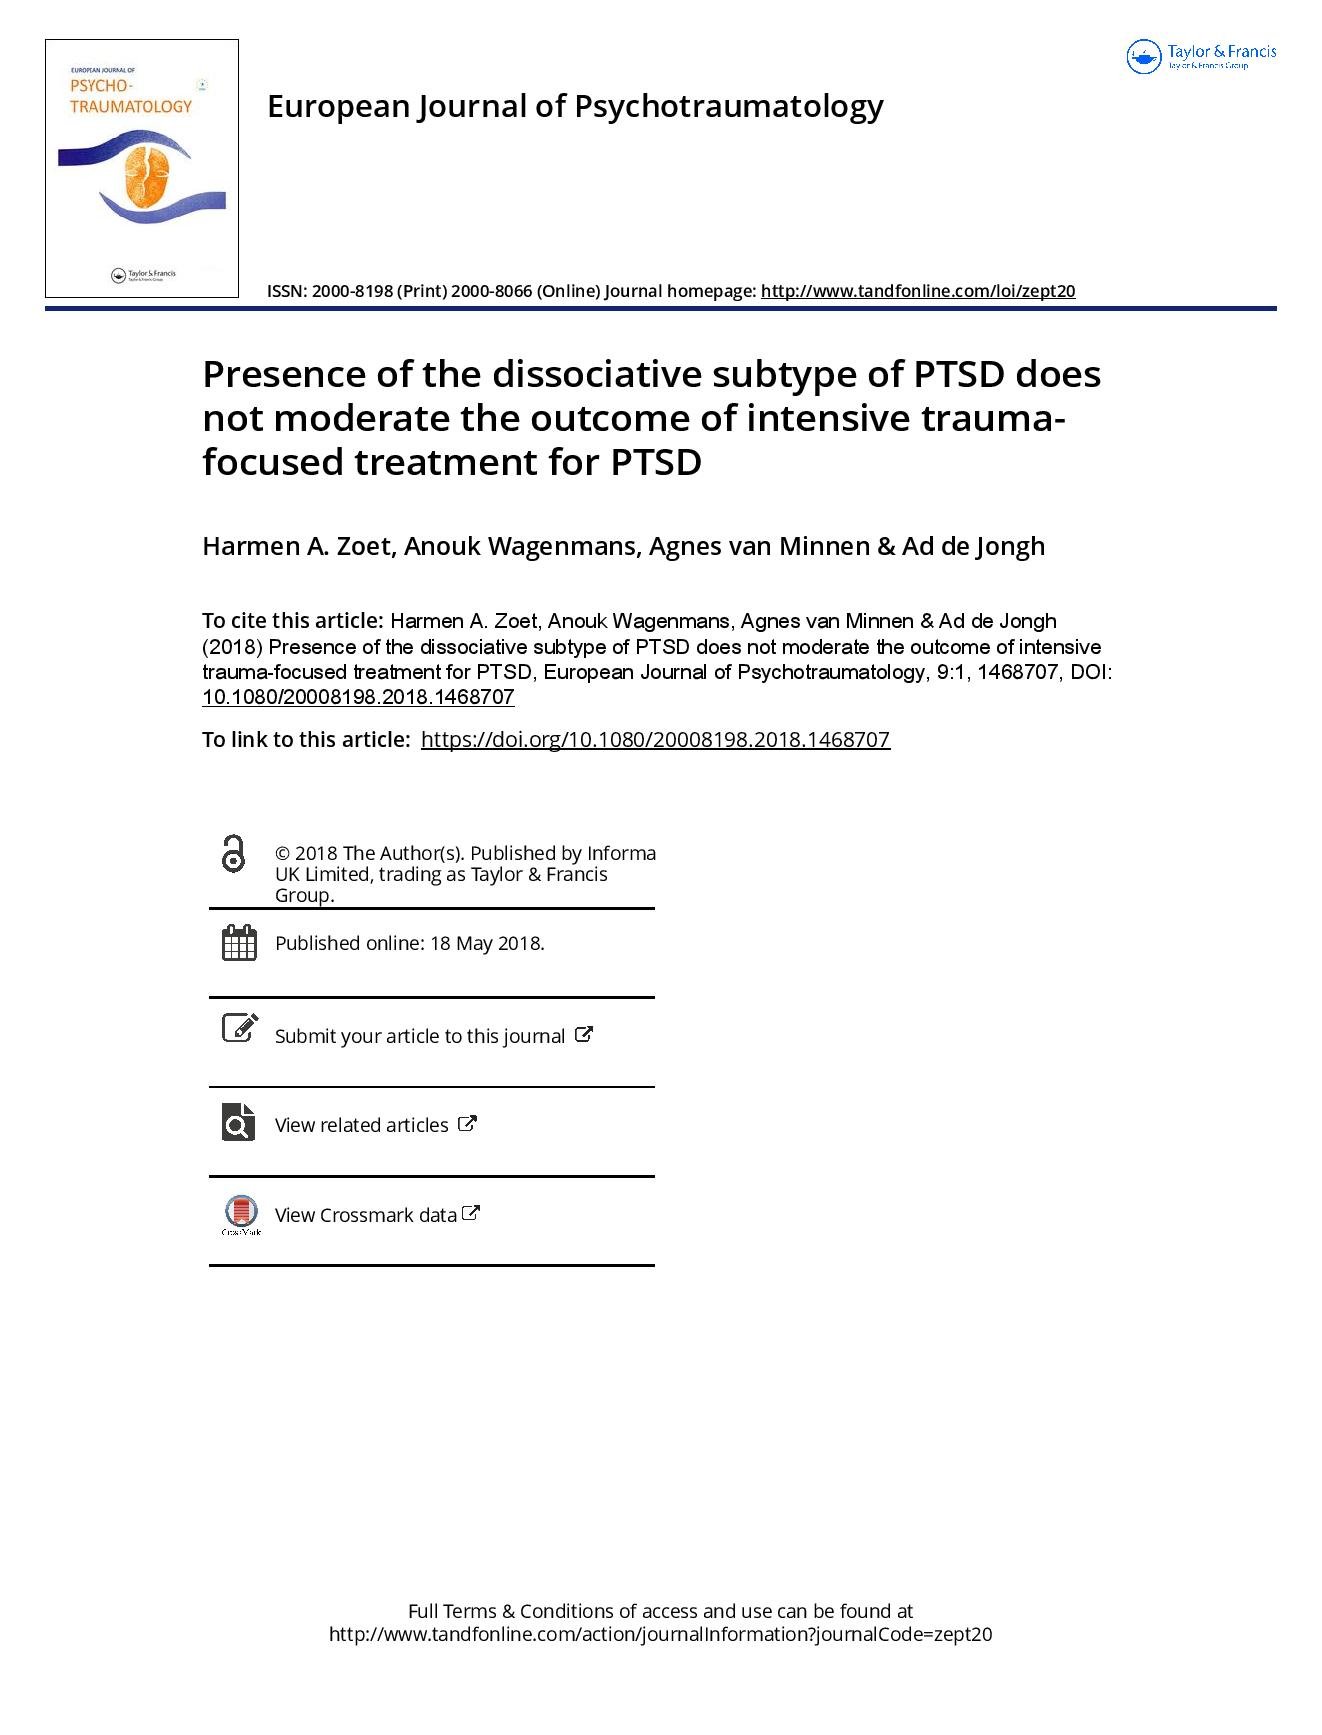 Presence of the dissociative subtype of PTSD does not moderate treatment outcome